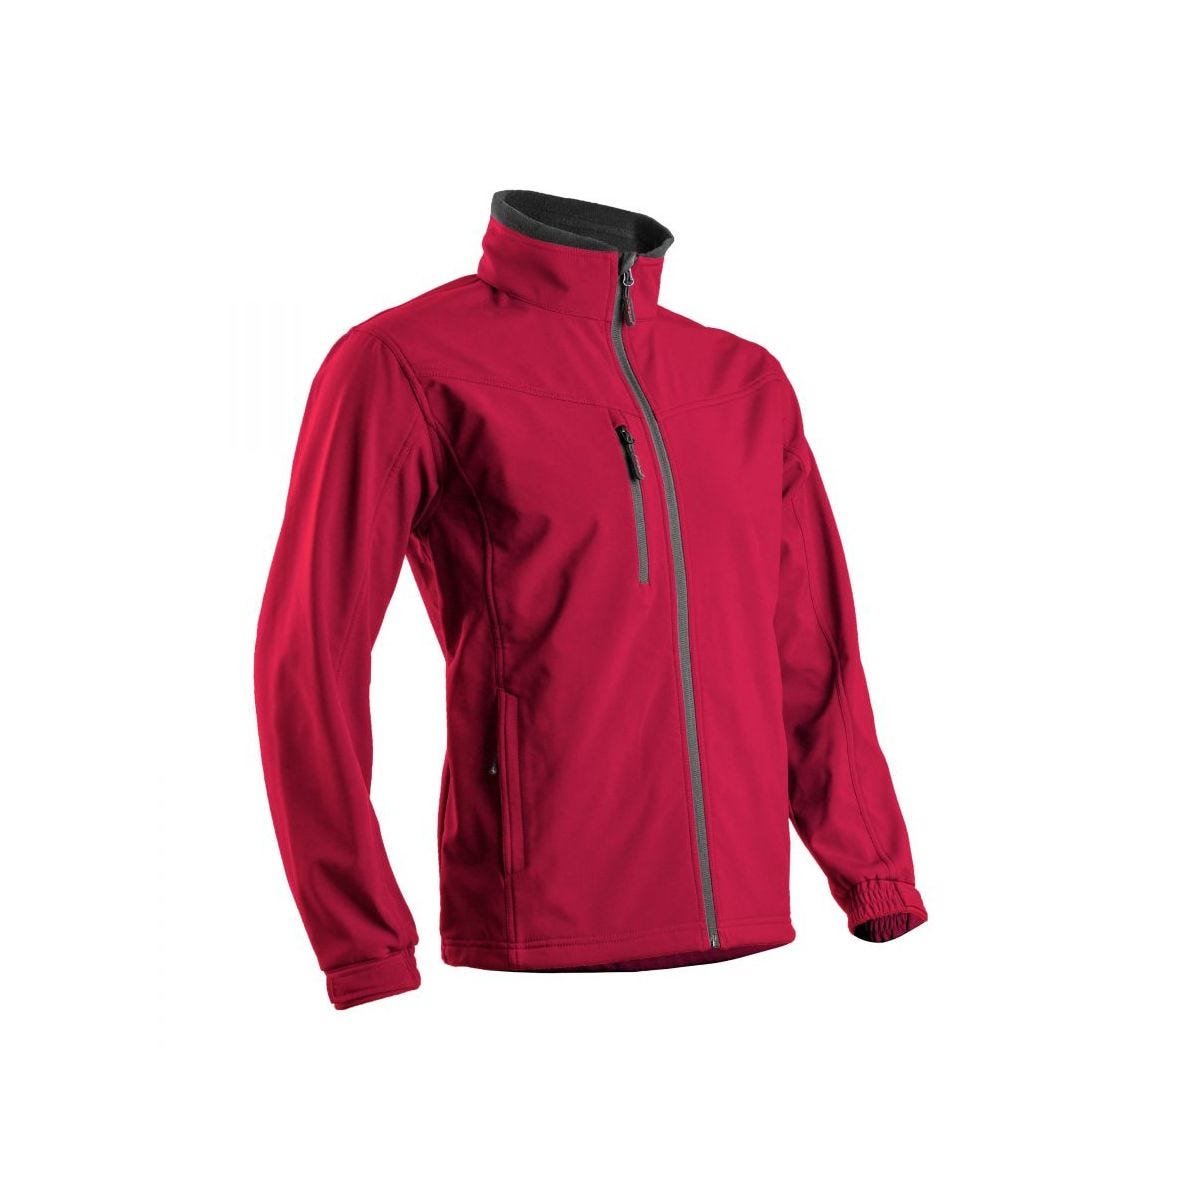 Veste softshell YANG II Rouge - Coverguard - Taille M 0